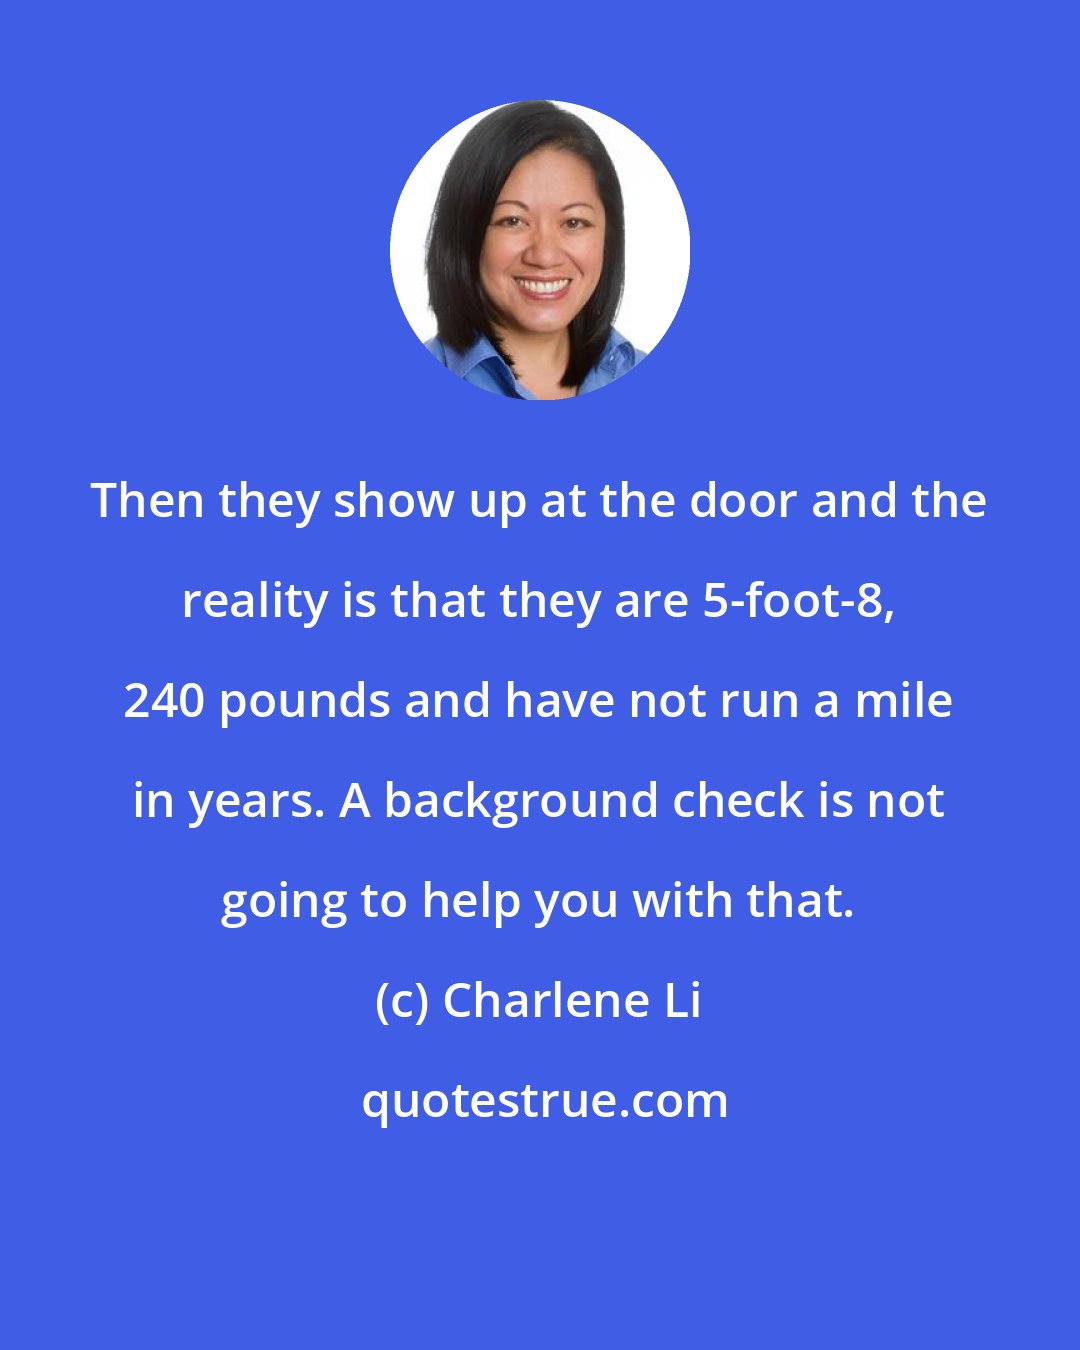 Charlene Li: Then they show up at the door and the reality is that they are 5-foot-8, 240 pounds and have not run a mile in years. A background check is not going to help you with that.